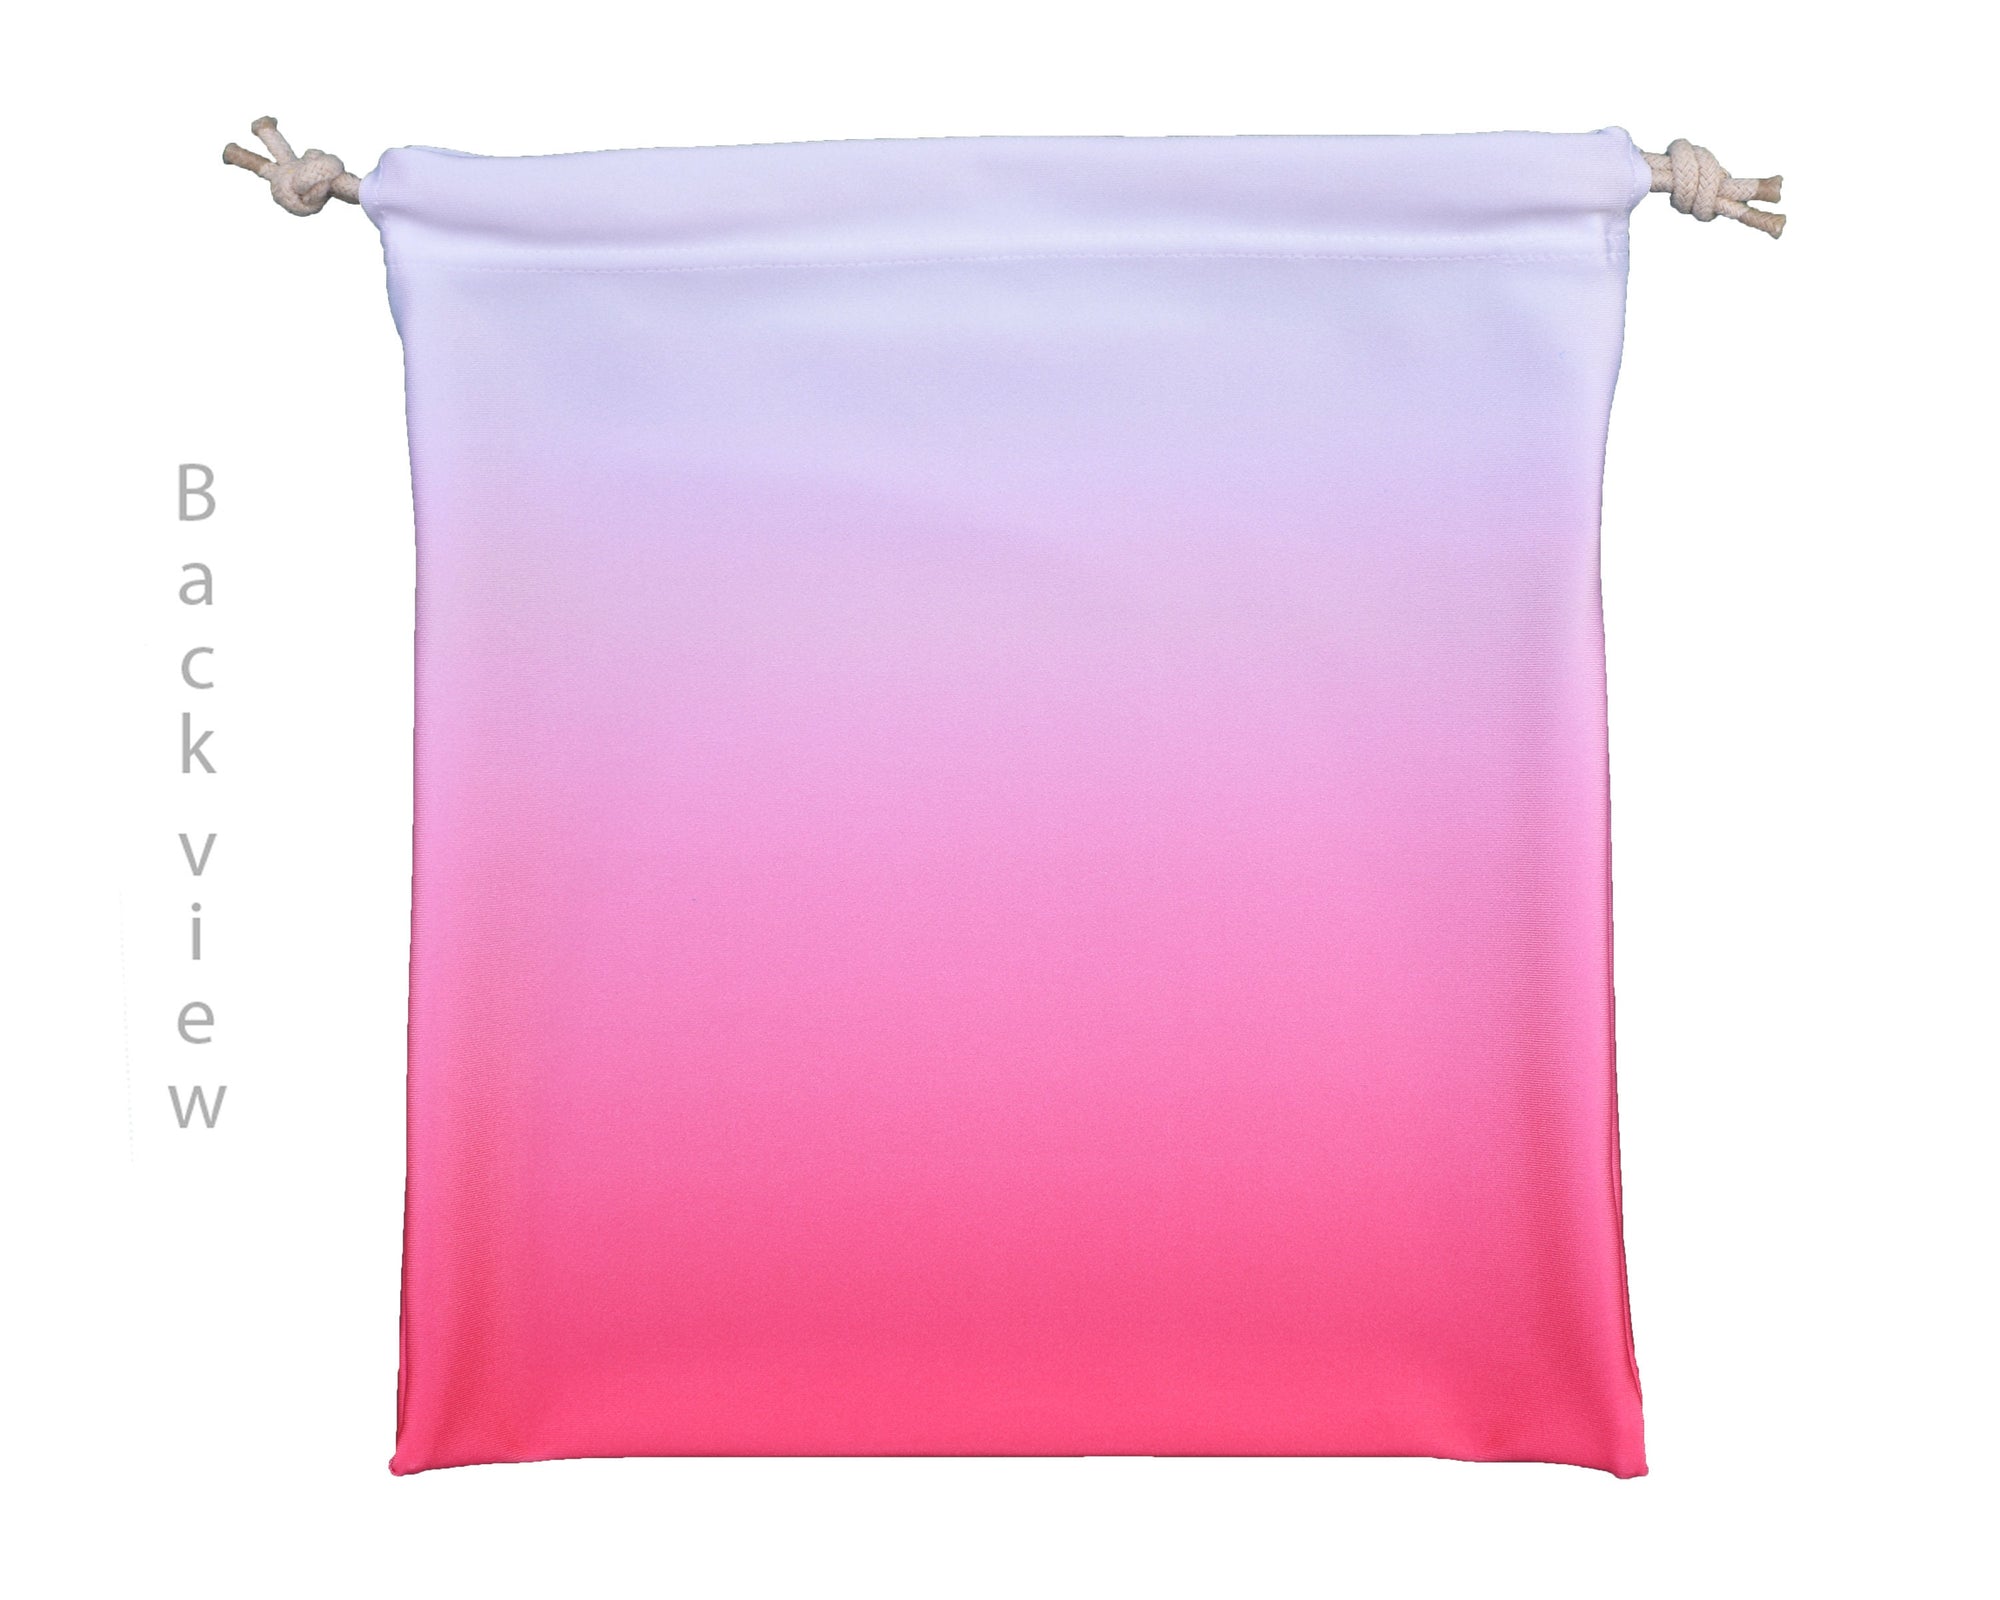 Personalized Gymnastics Grip Bag with Handstand in Dark Coral & White Ombre